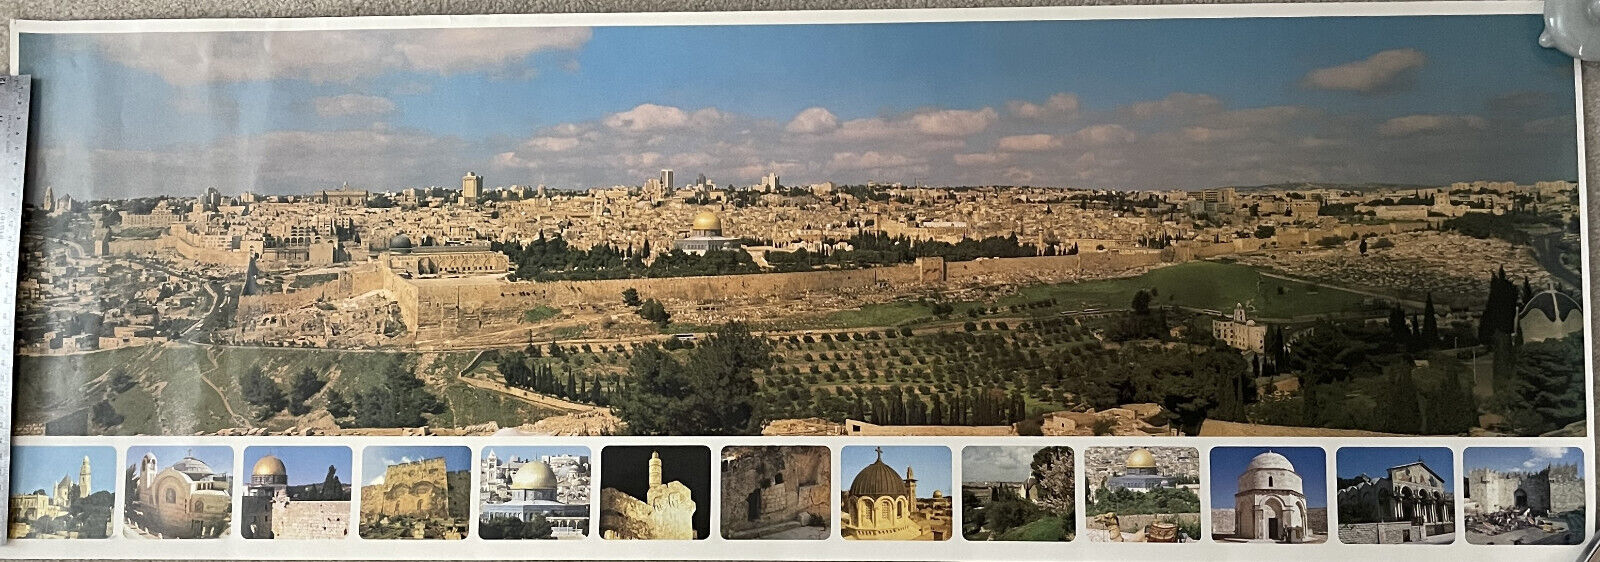 Jerusalem As Seen From The Mount Of Olives, 2-Sided Panoramic Poster 39x13